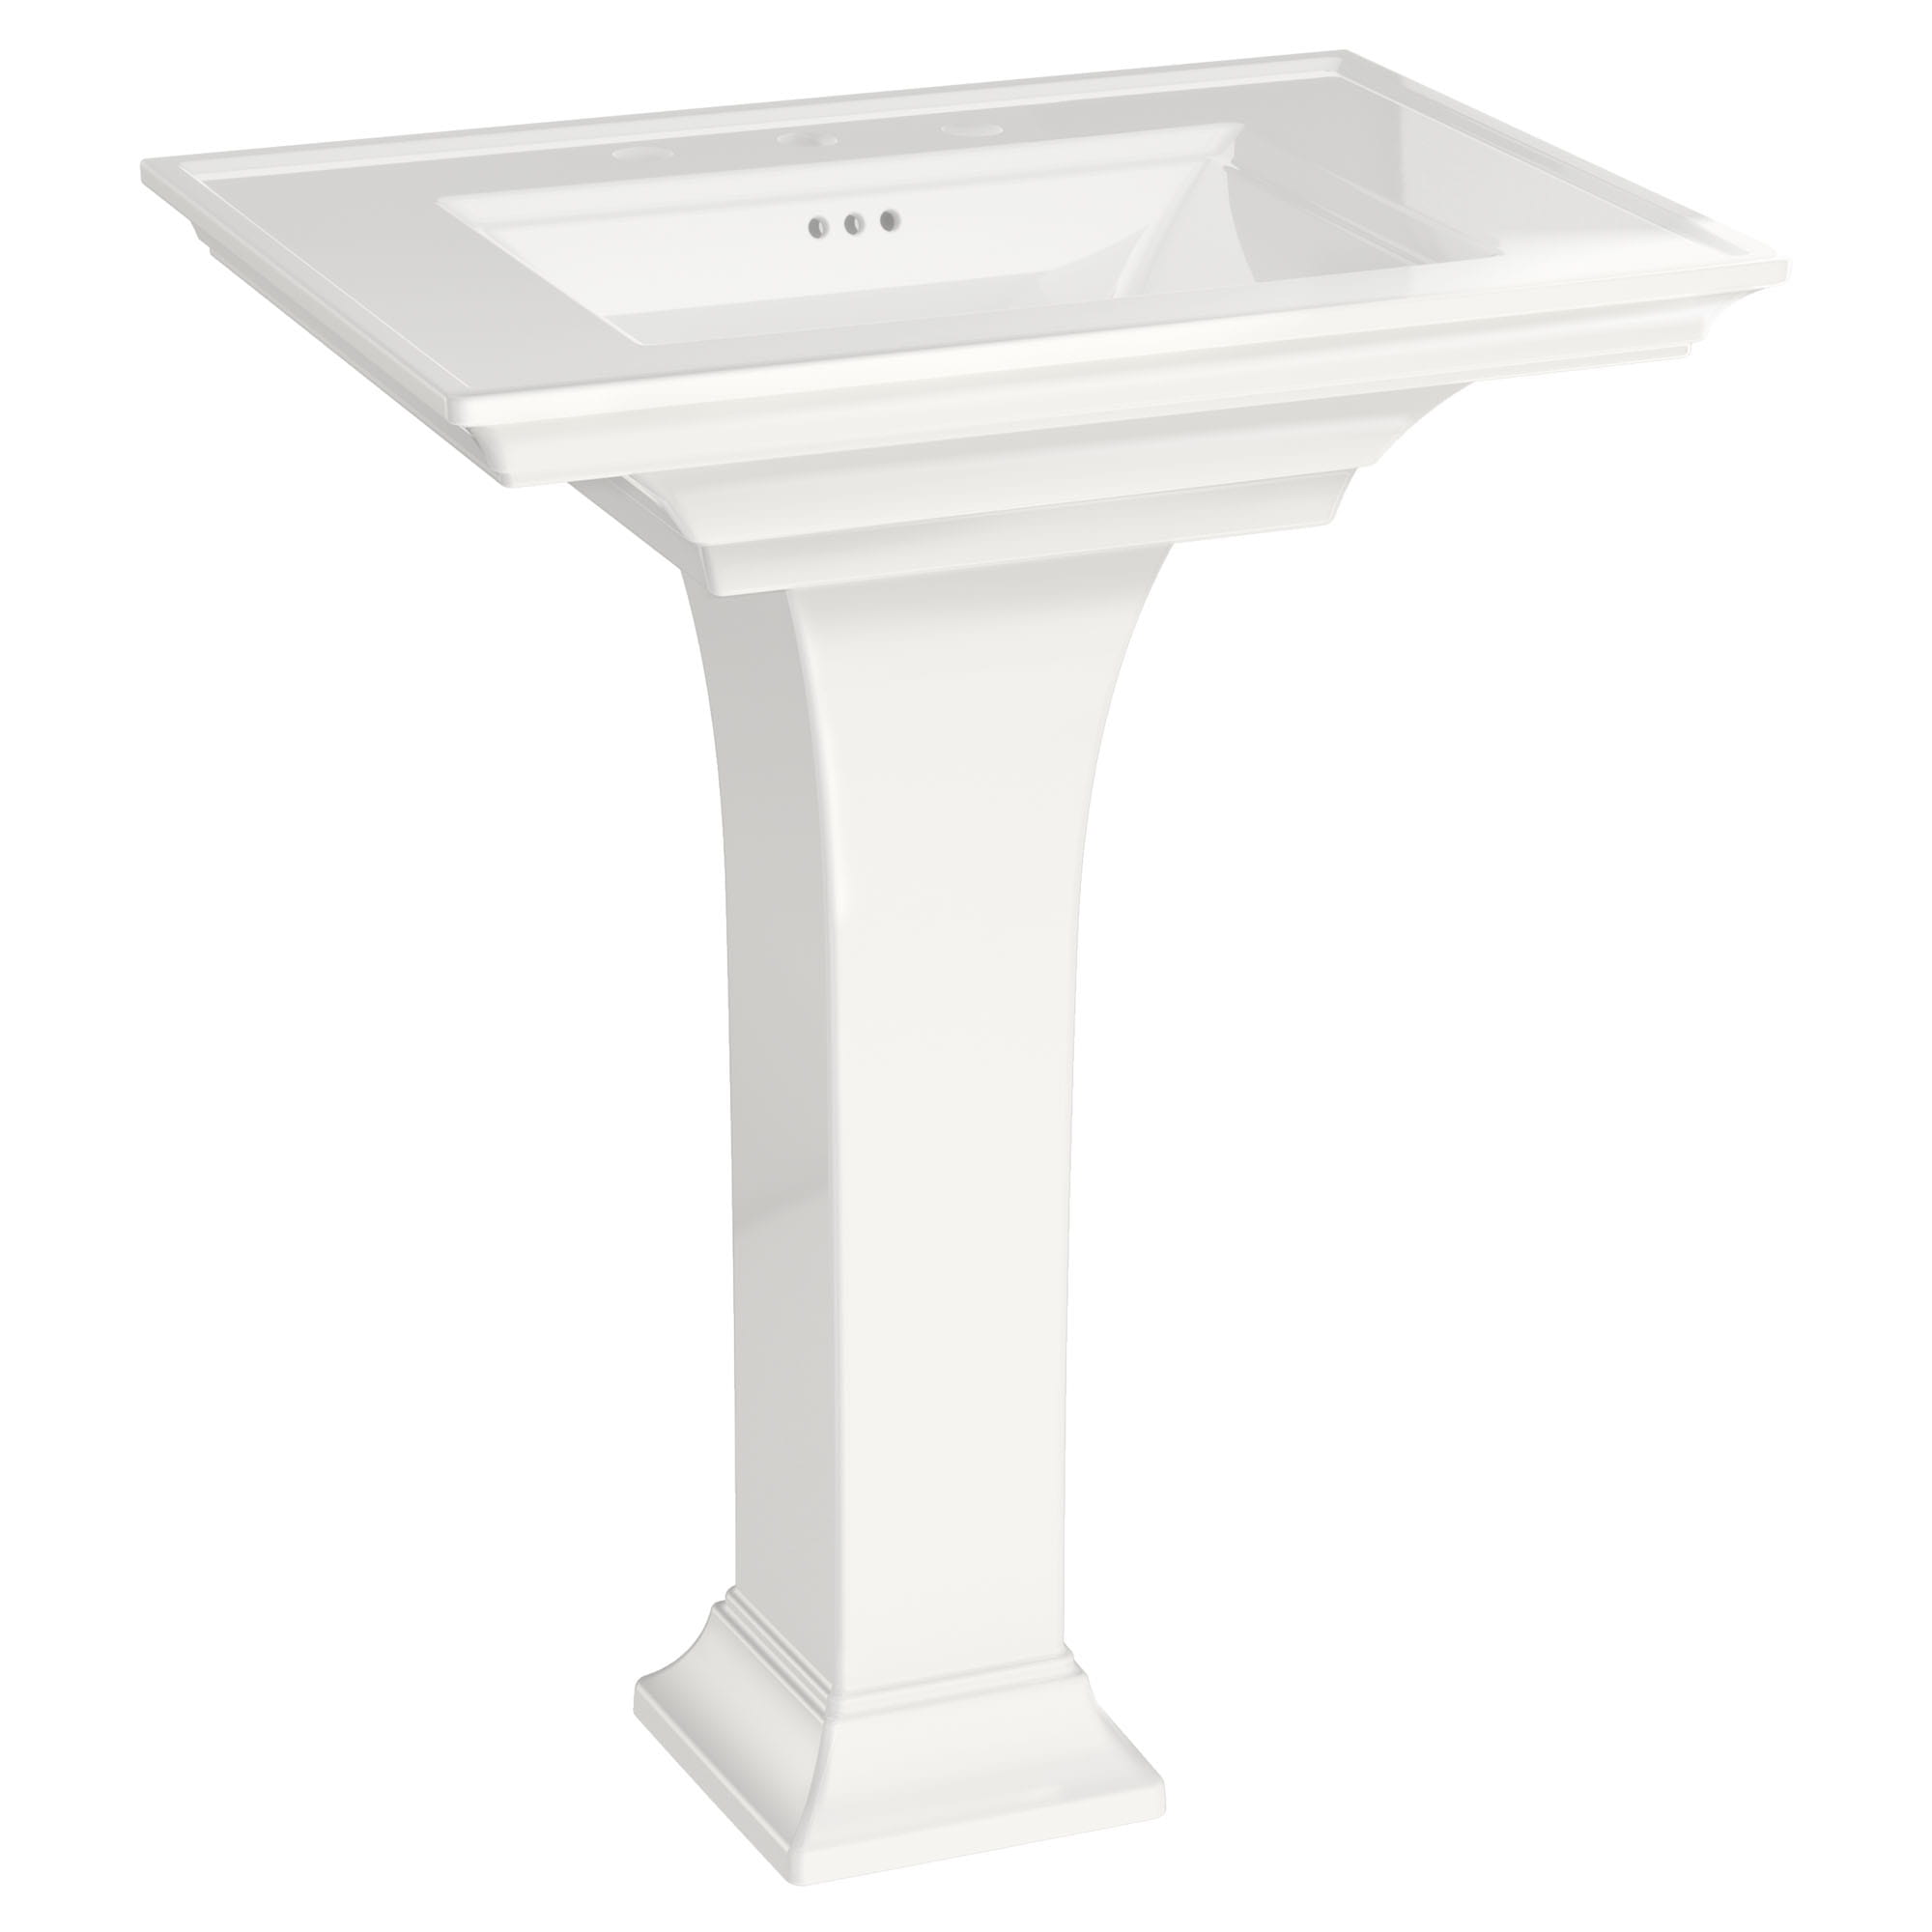 Town Square® S 8-Inch Widespread Pedestal Sink Top and Leg Combination